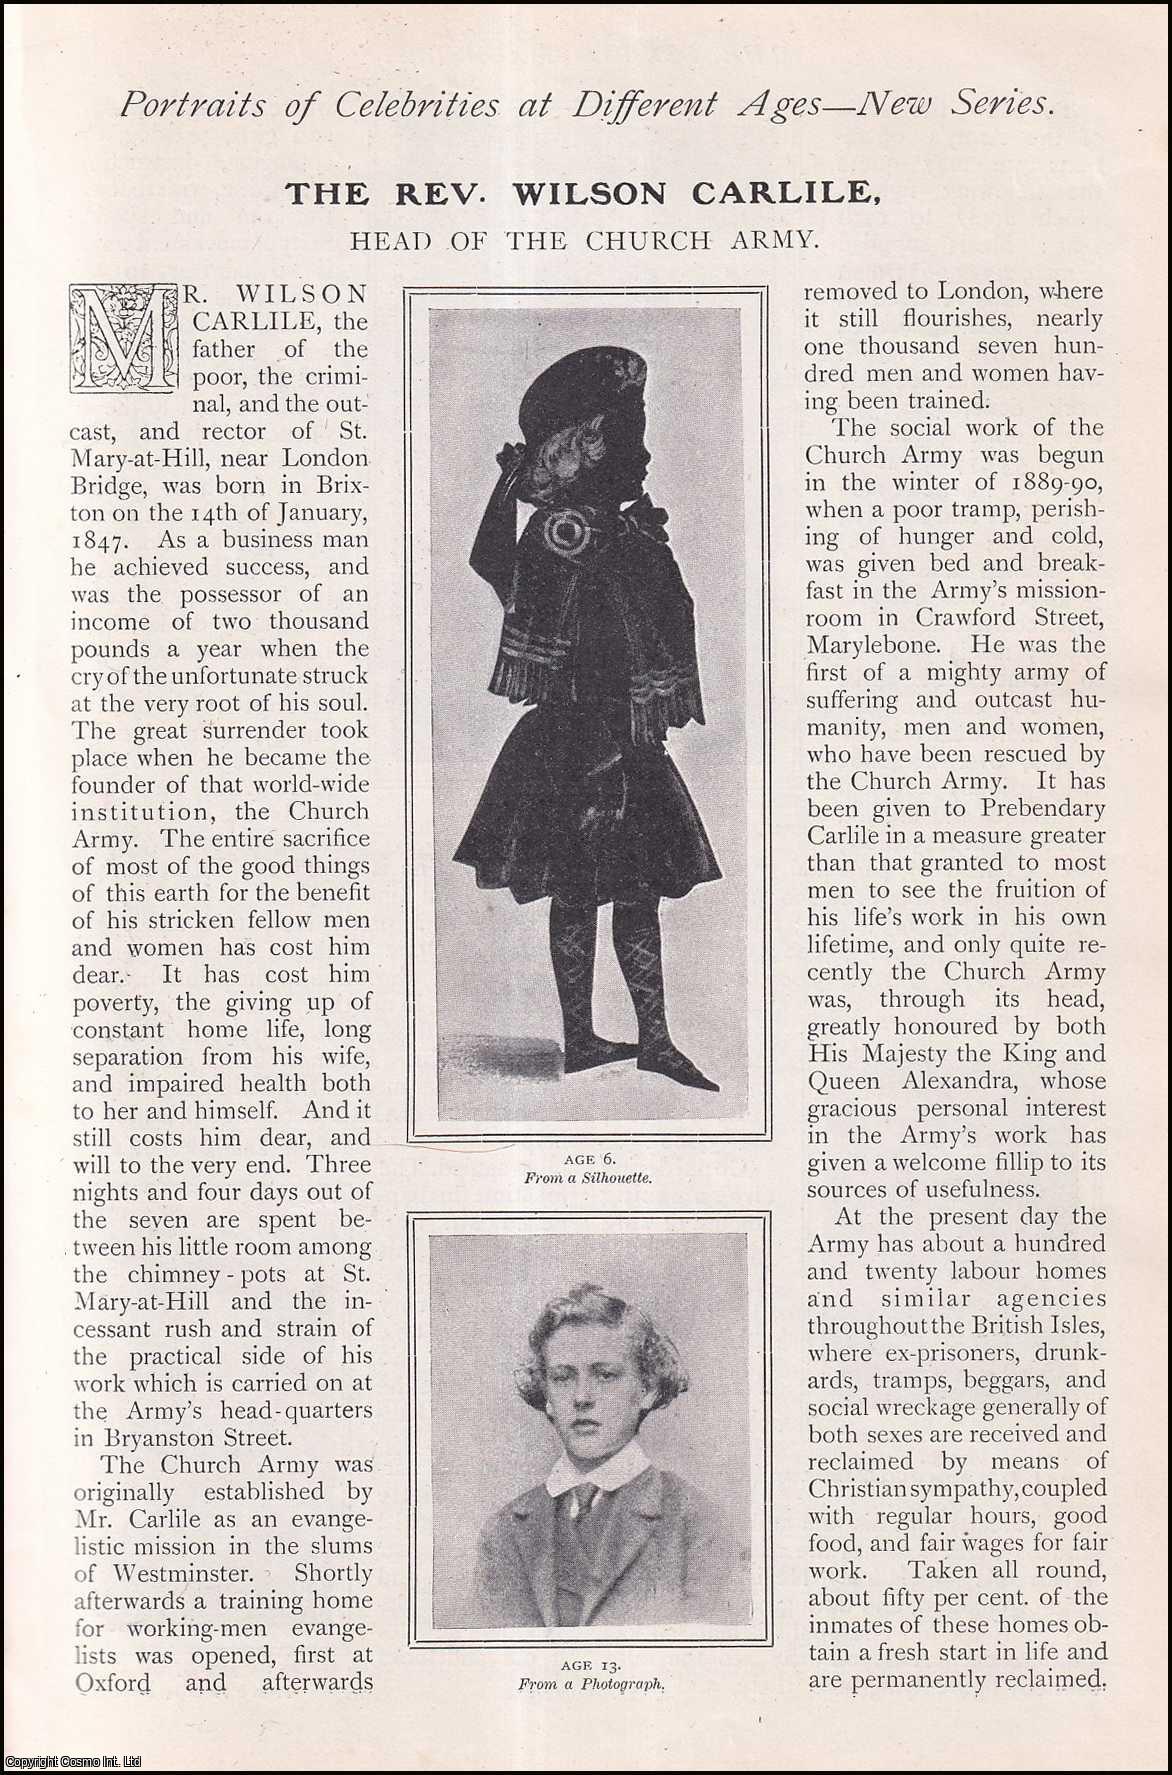 --- - The Rev. Wilson Carlile. Portraits of Celebrities at Different Ages. A rare original article from The Strand Magazine, 1906.